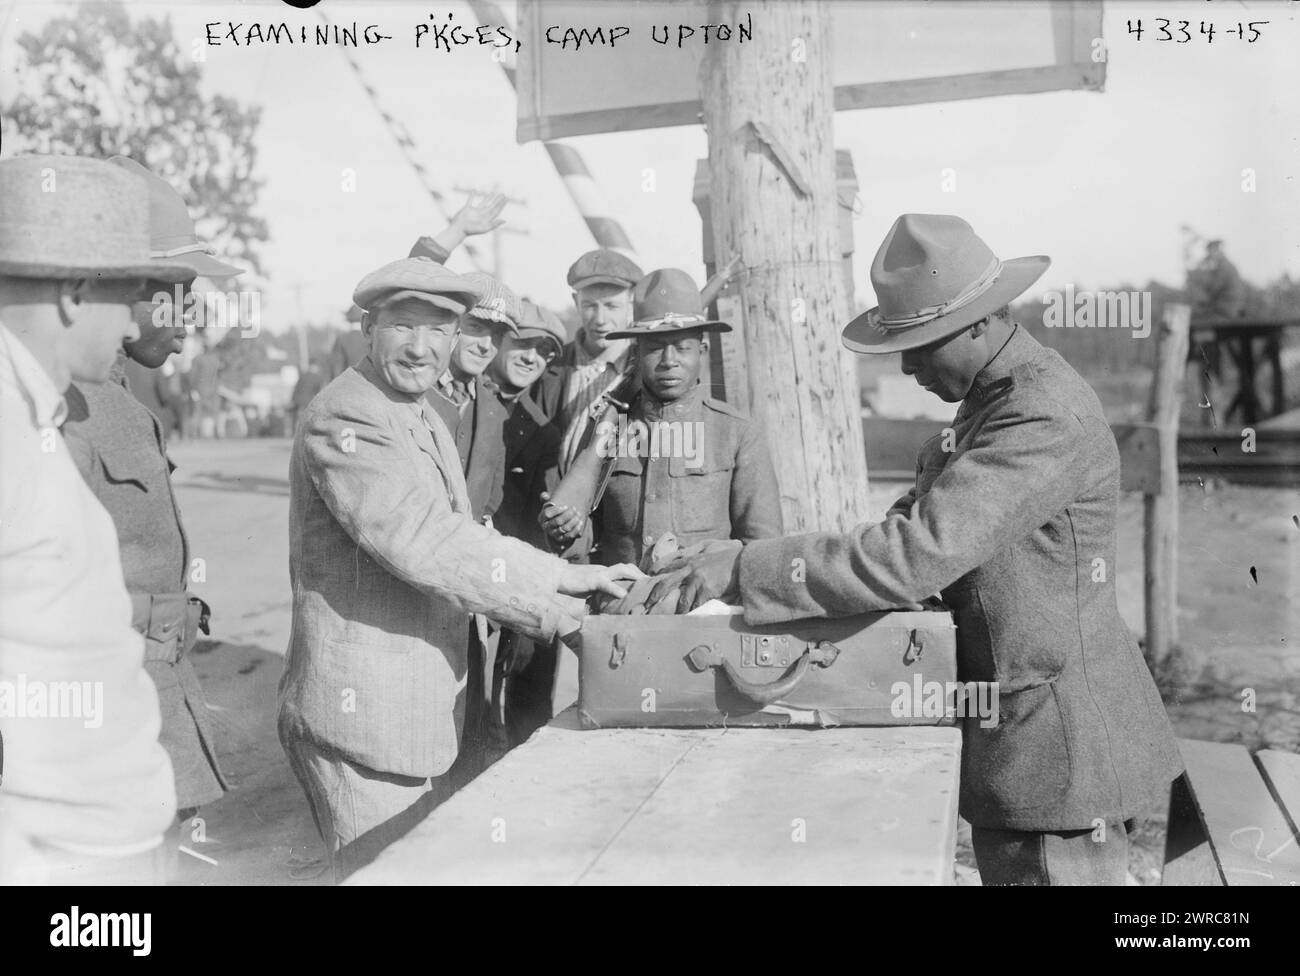 Examining pkges, Camp Upton, Photograph shows African American soldiers looking at packages at Camp Upton, a U.S. Army installation located on Long Island, in Yaphank, New York, during World War I., 1917 September, World War, 1914-1918, Glass negatives, 1 negative: glass Stock Photo